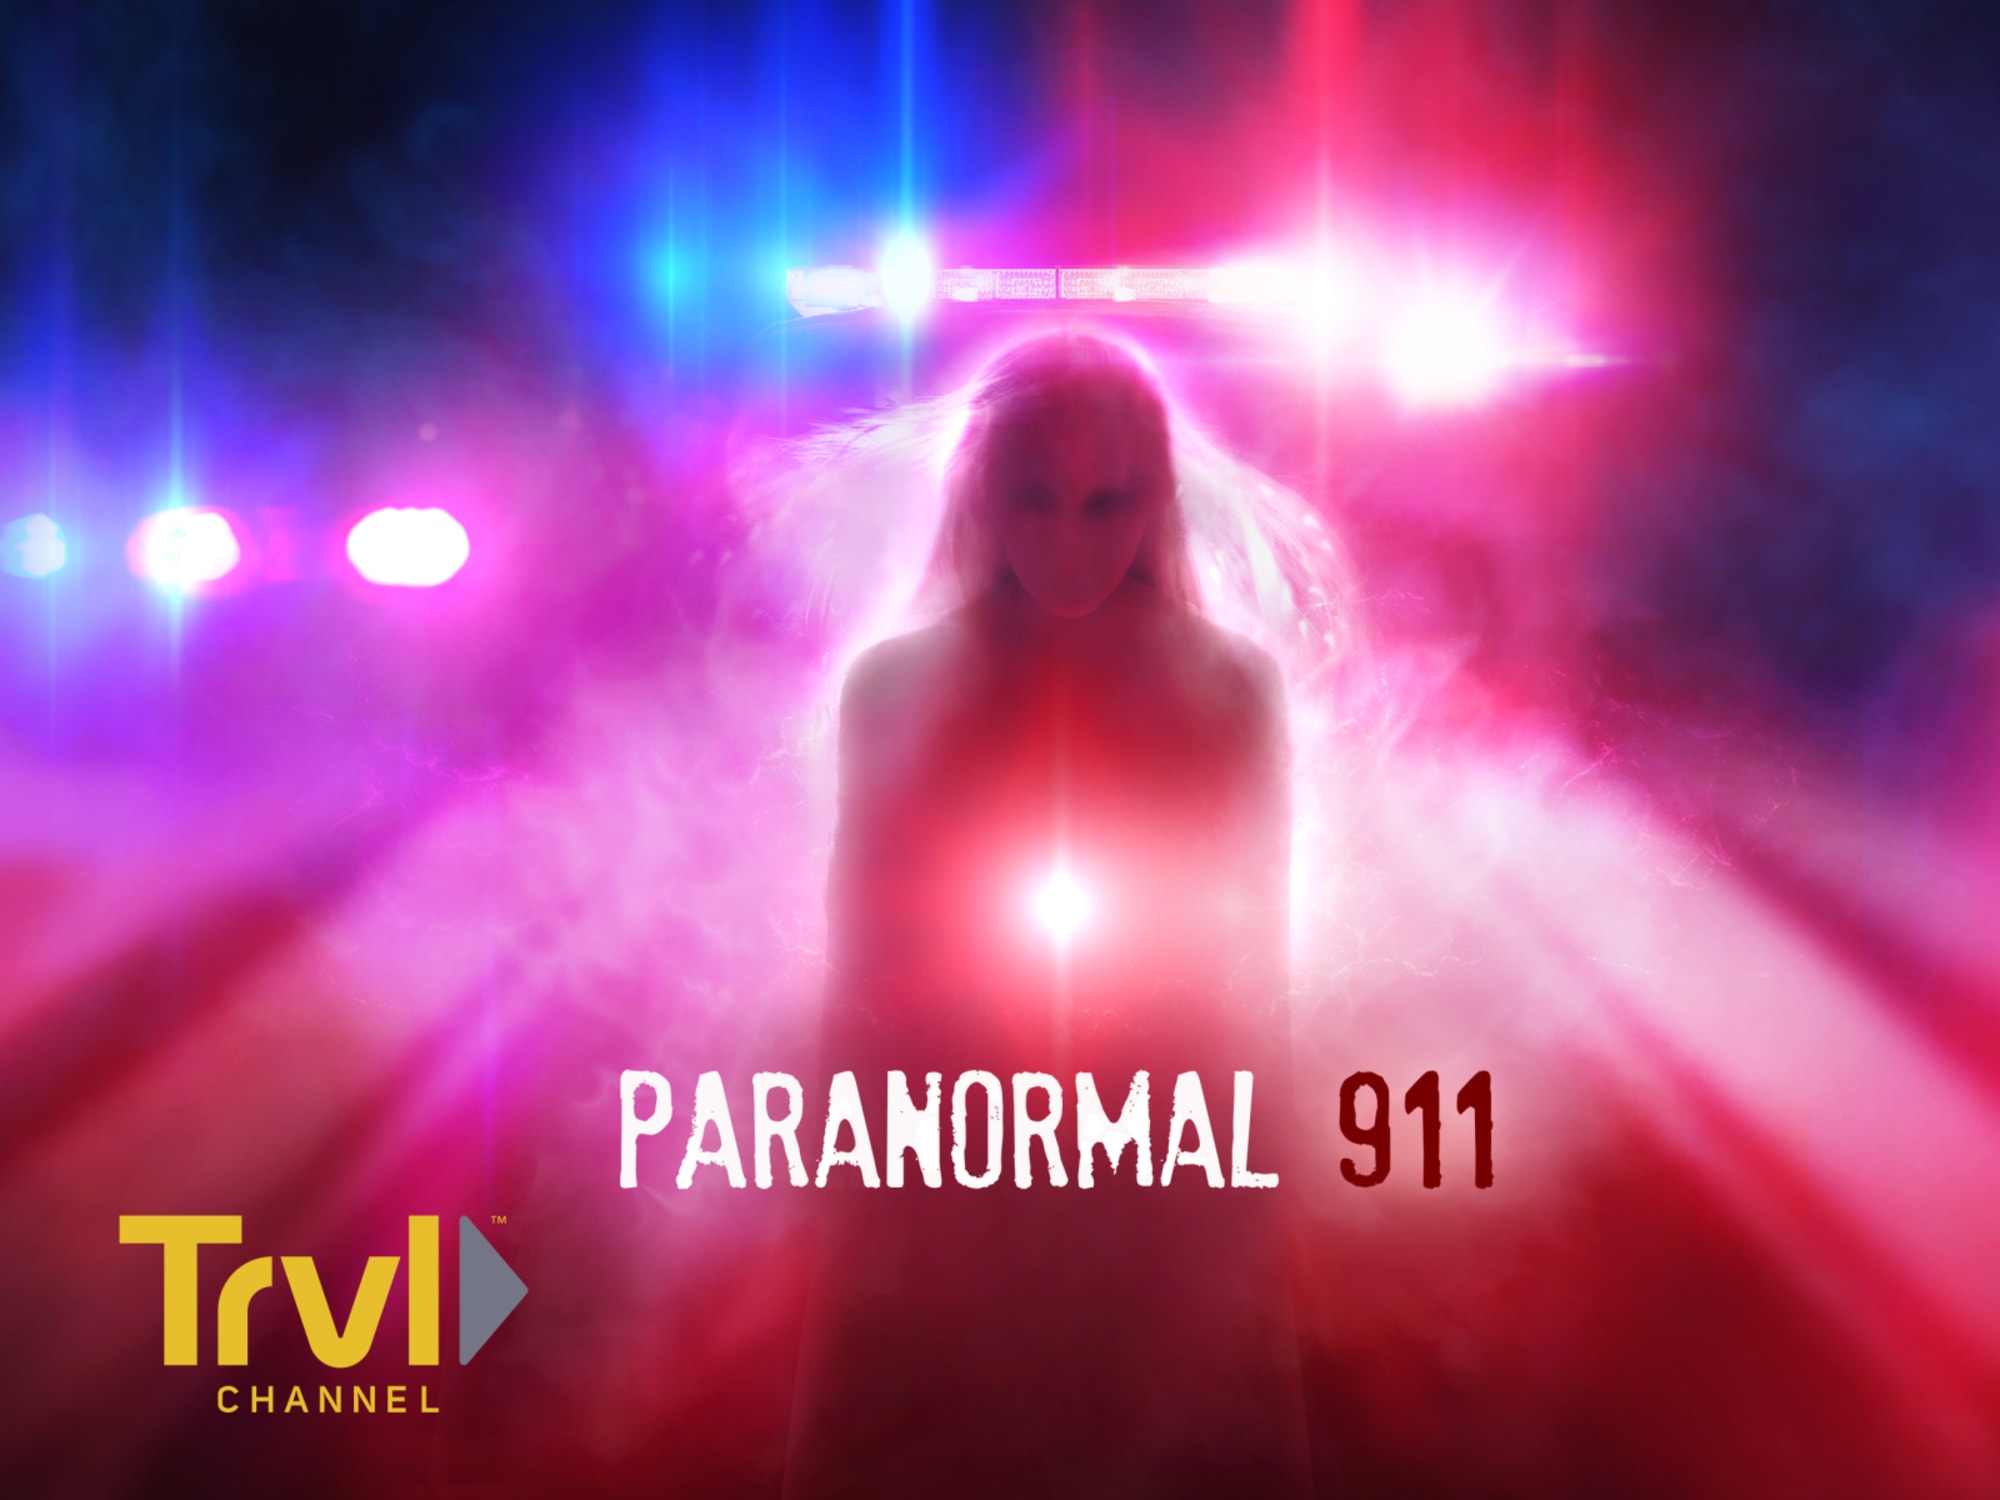 Travel Channel Paranormal 911 dials up the terror for a new season